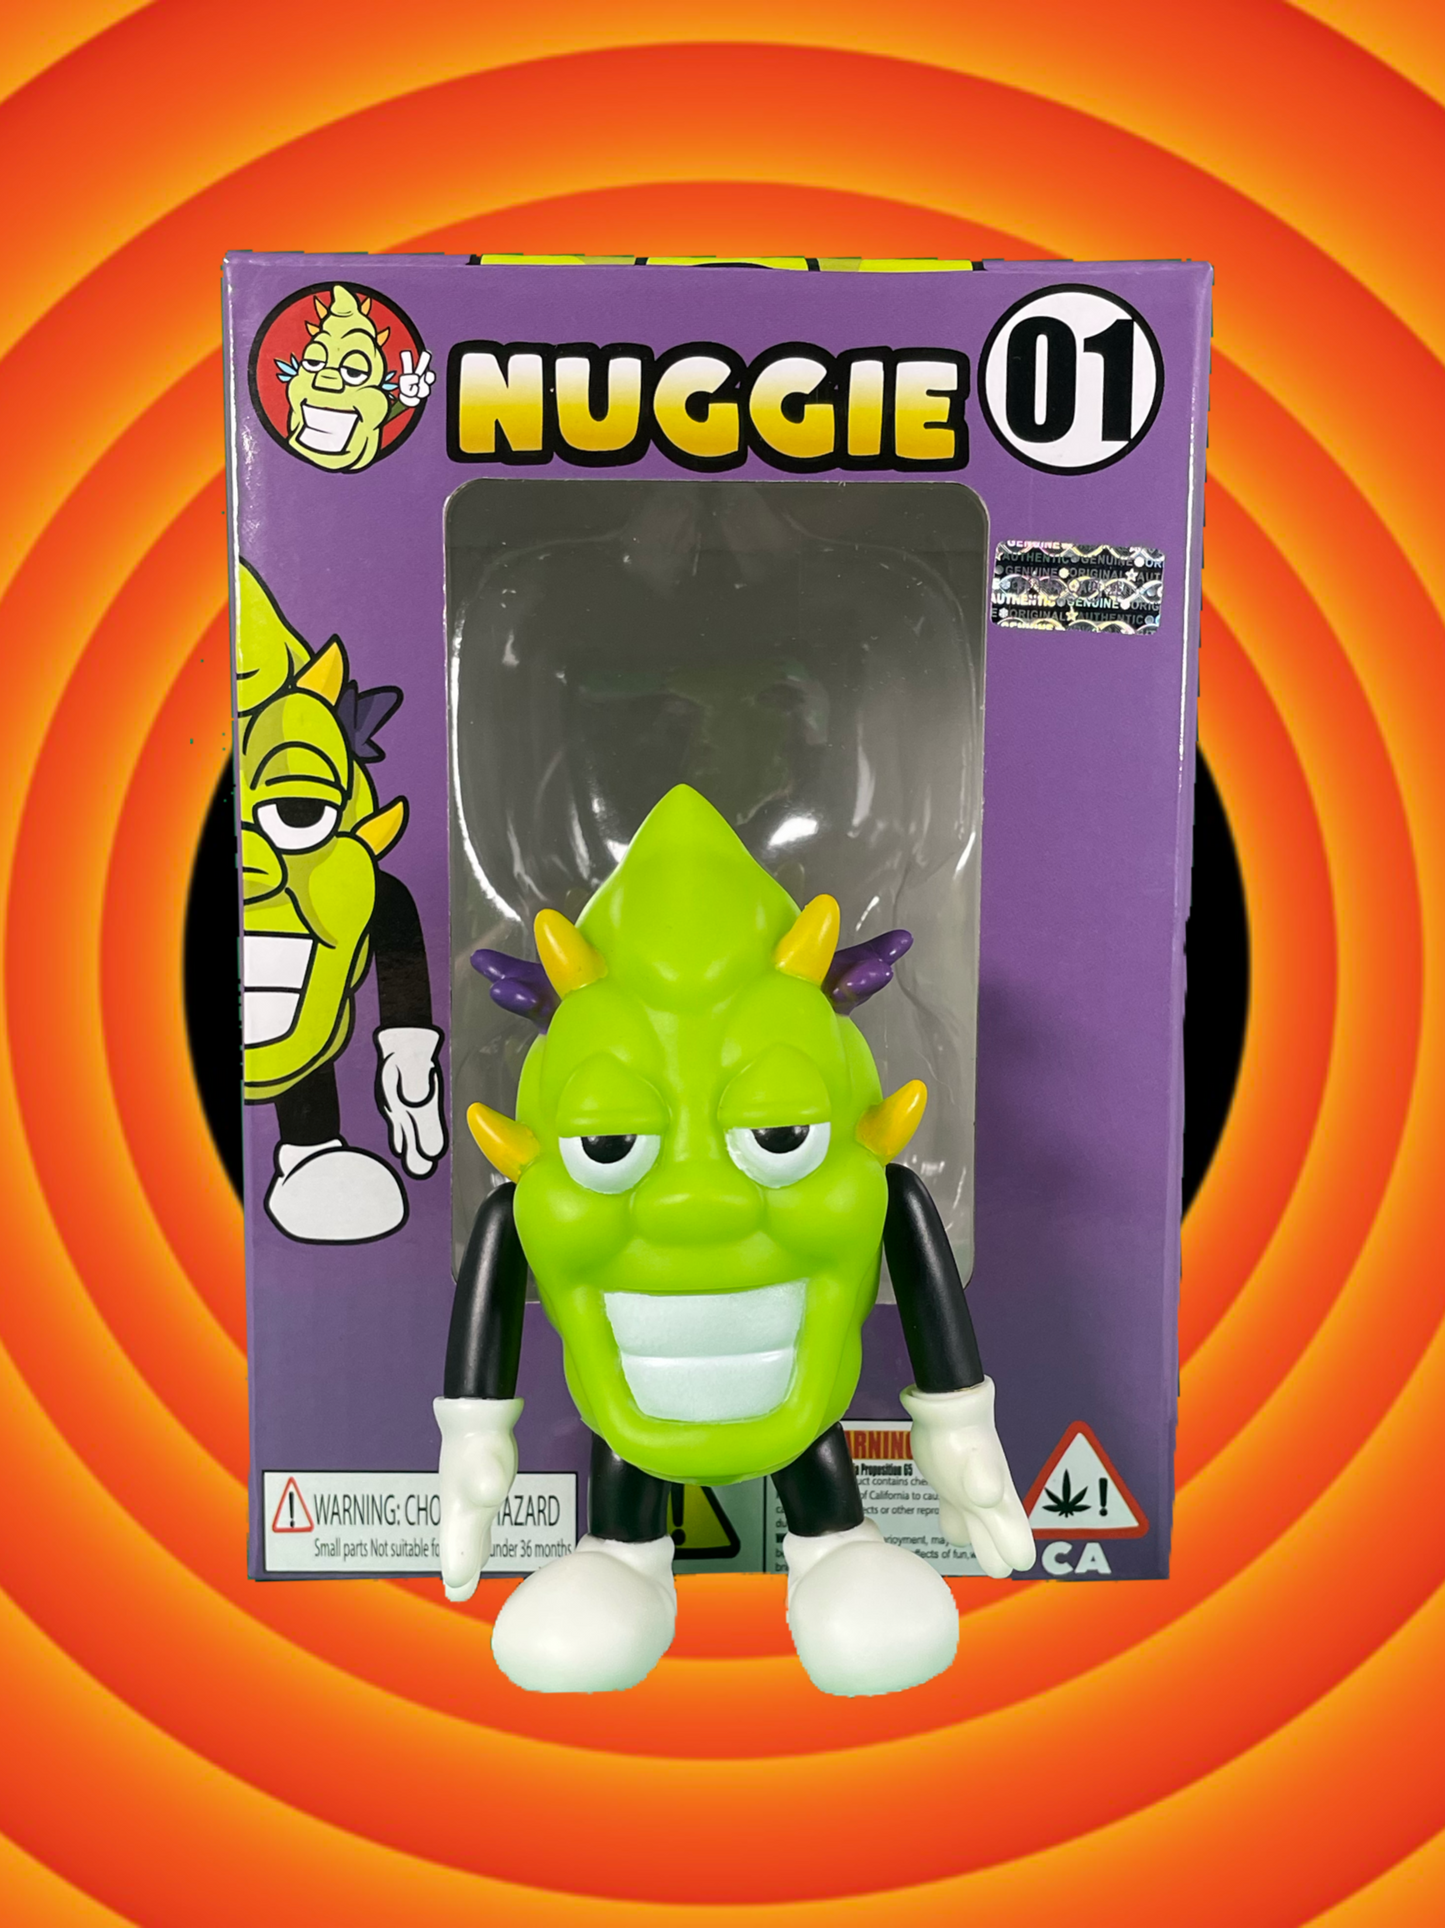 Nuggie Limited Edition Collectible 1 of 500, 4-inch hand-painted figures, with first edition collectible box